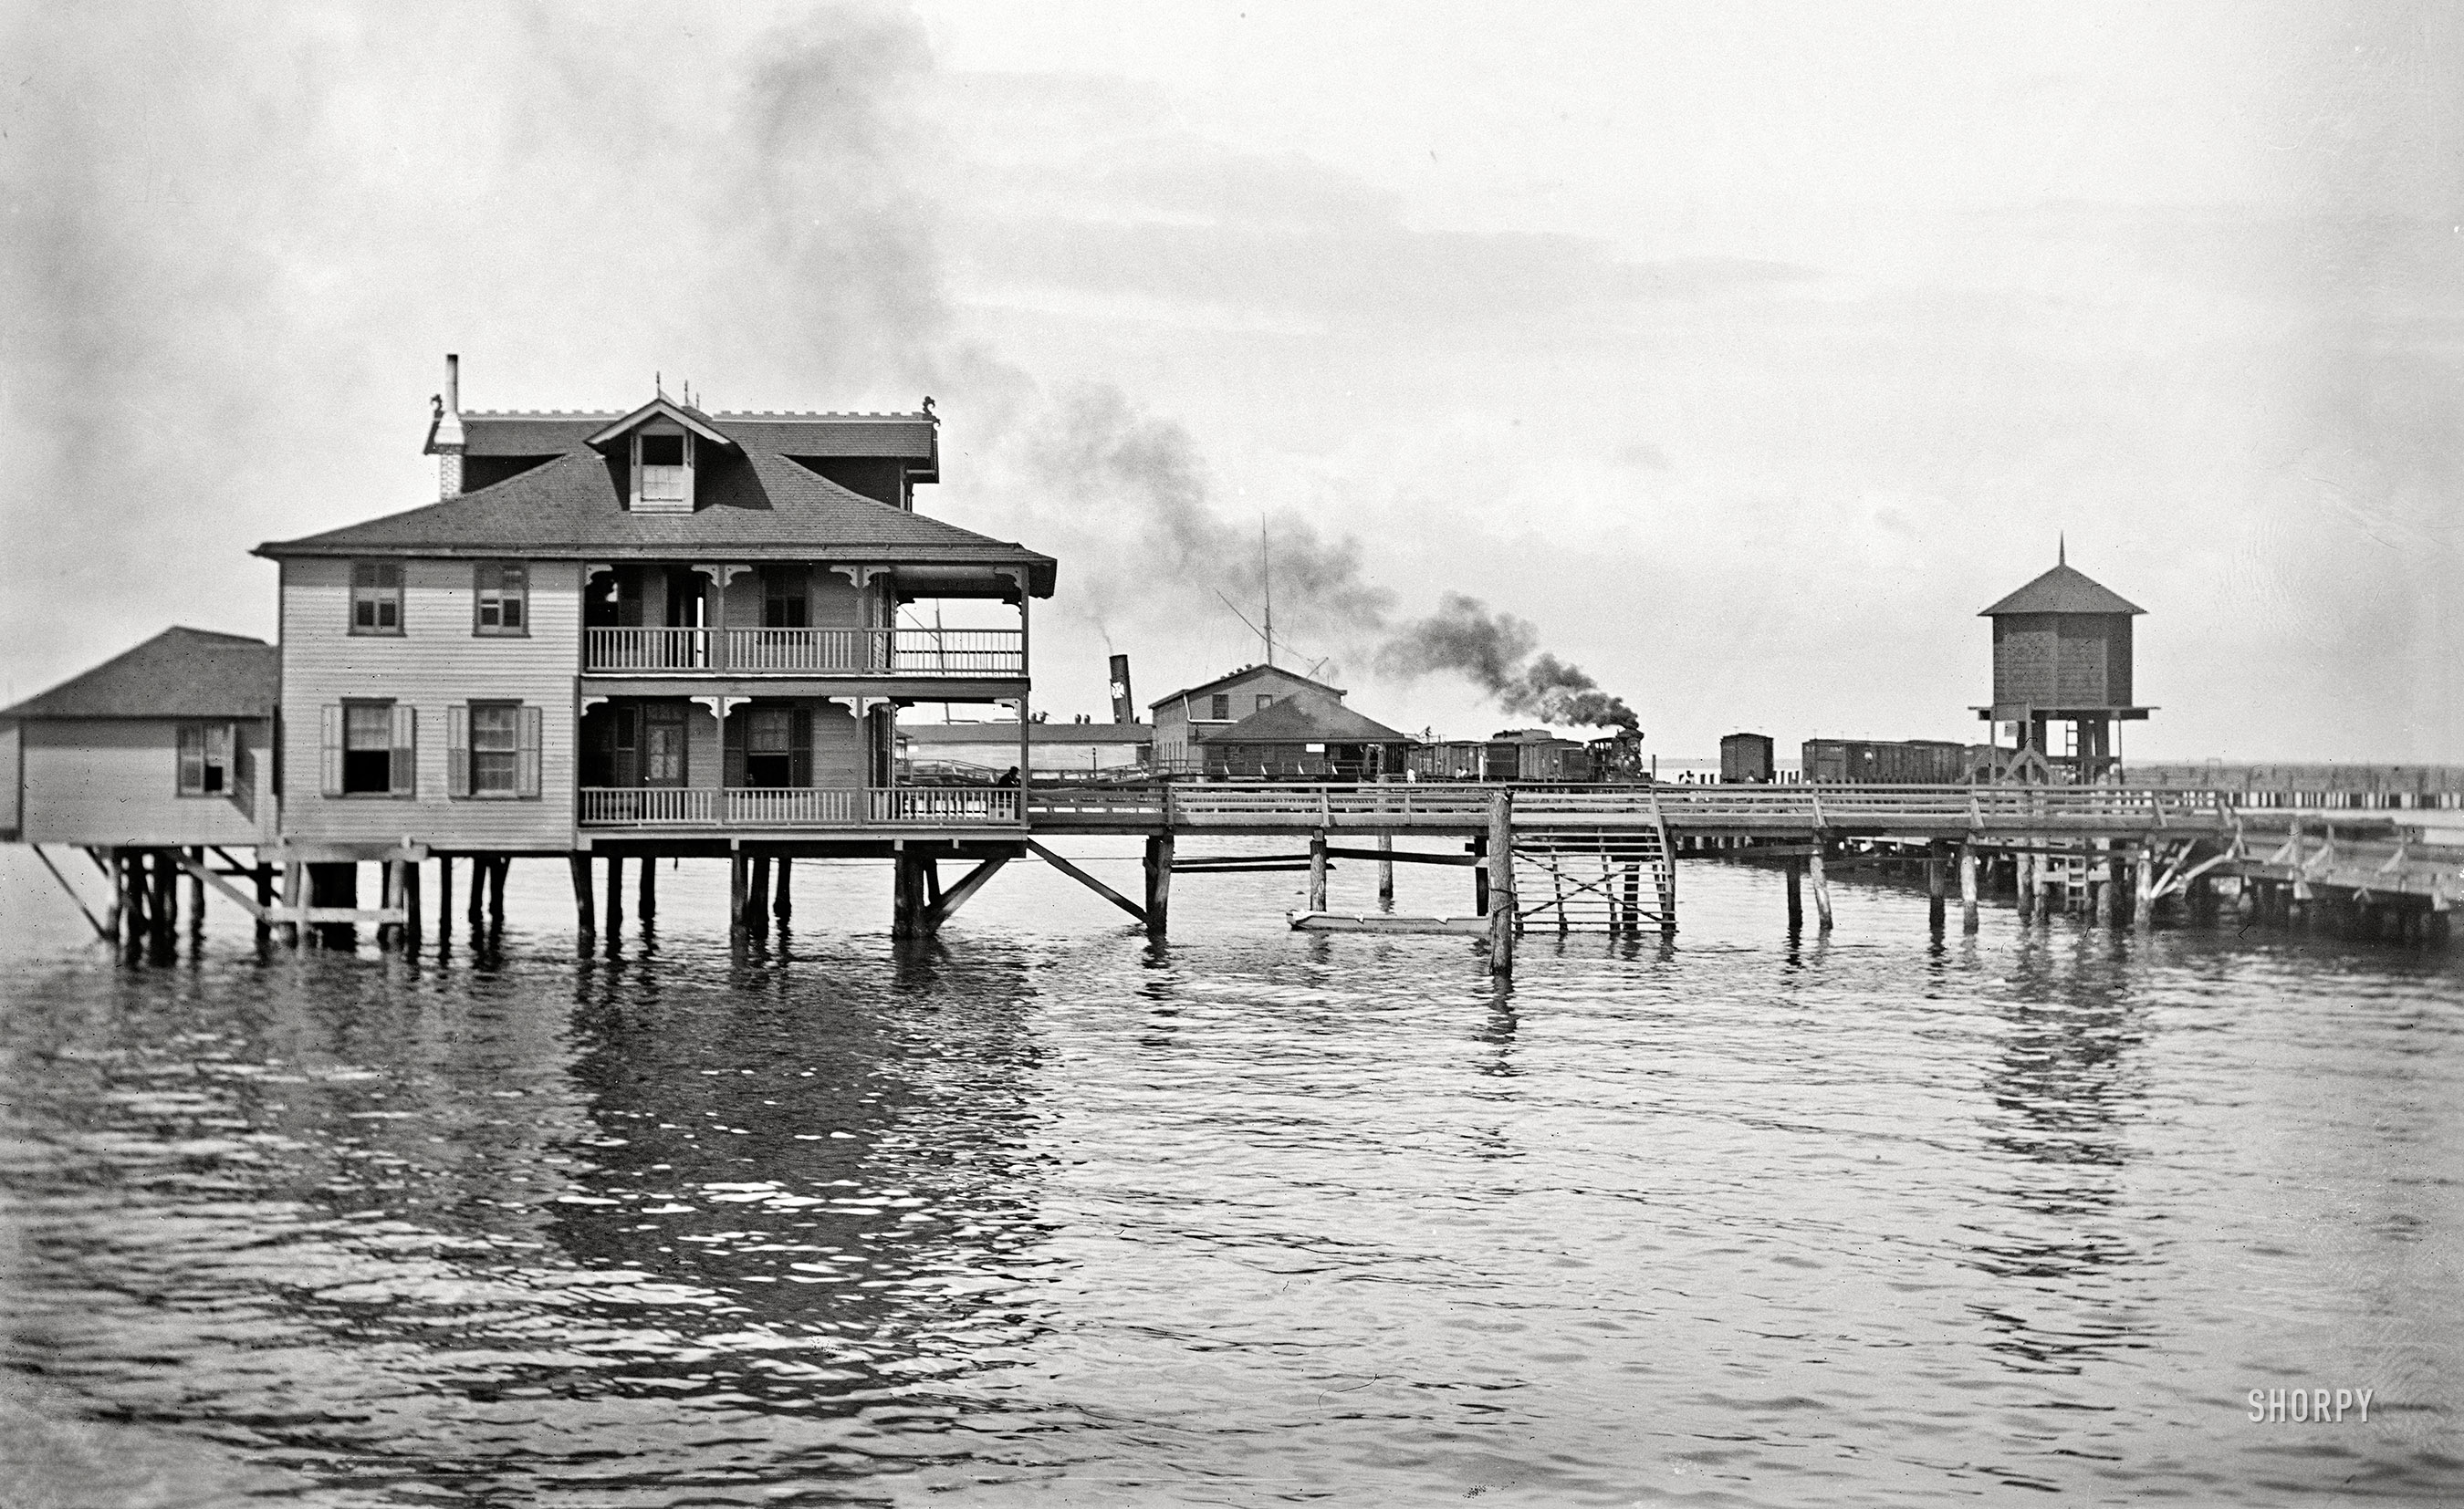 Florida circa 1890s. "Tampa Pier." A house on the water. 5x7 inch dry plate glass negative by William Henry Jackson Detroit Publishing Co. View full size.